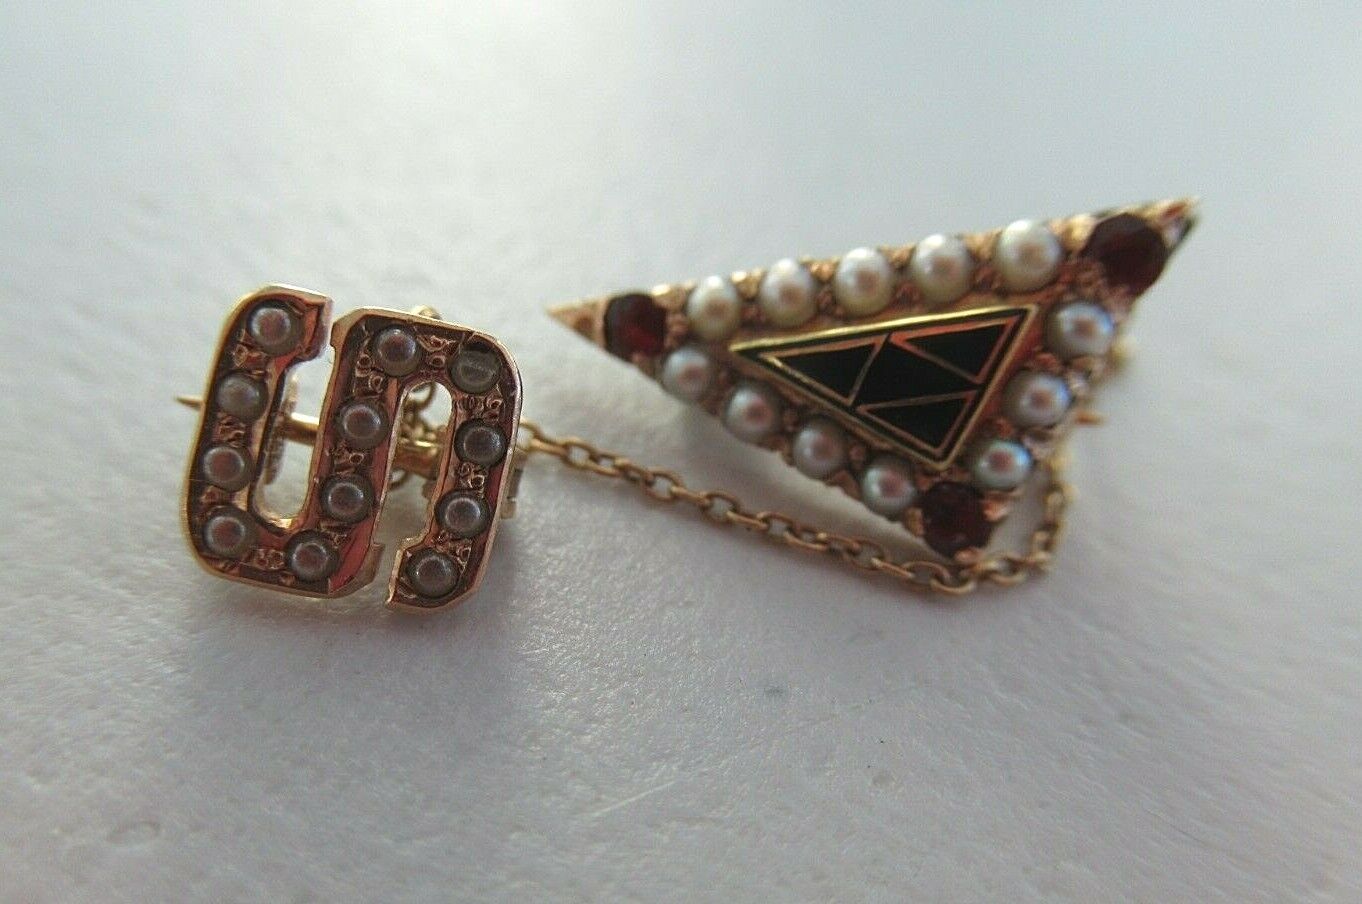 USA FRATERNITY PIN ALPHA DELTA DELTA. MADE IN GOLD. RUBIES. DATED. 149